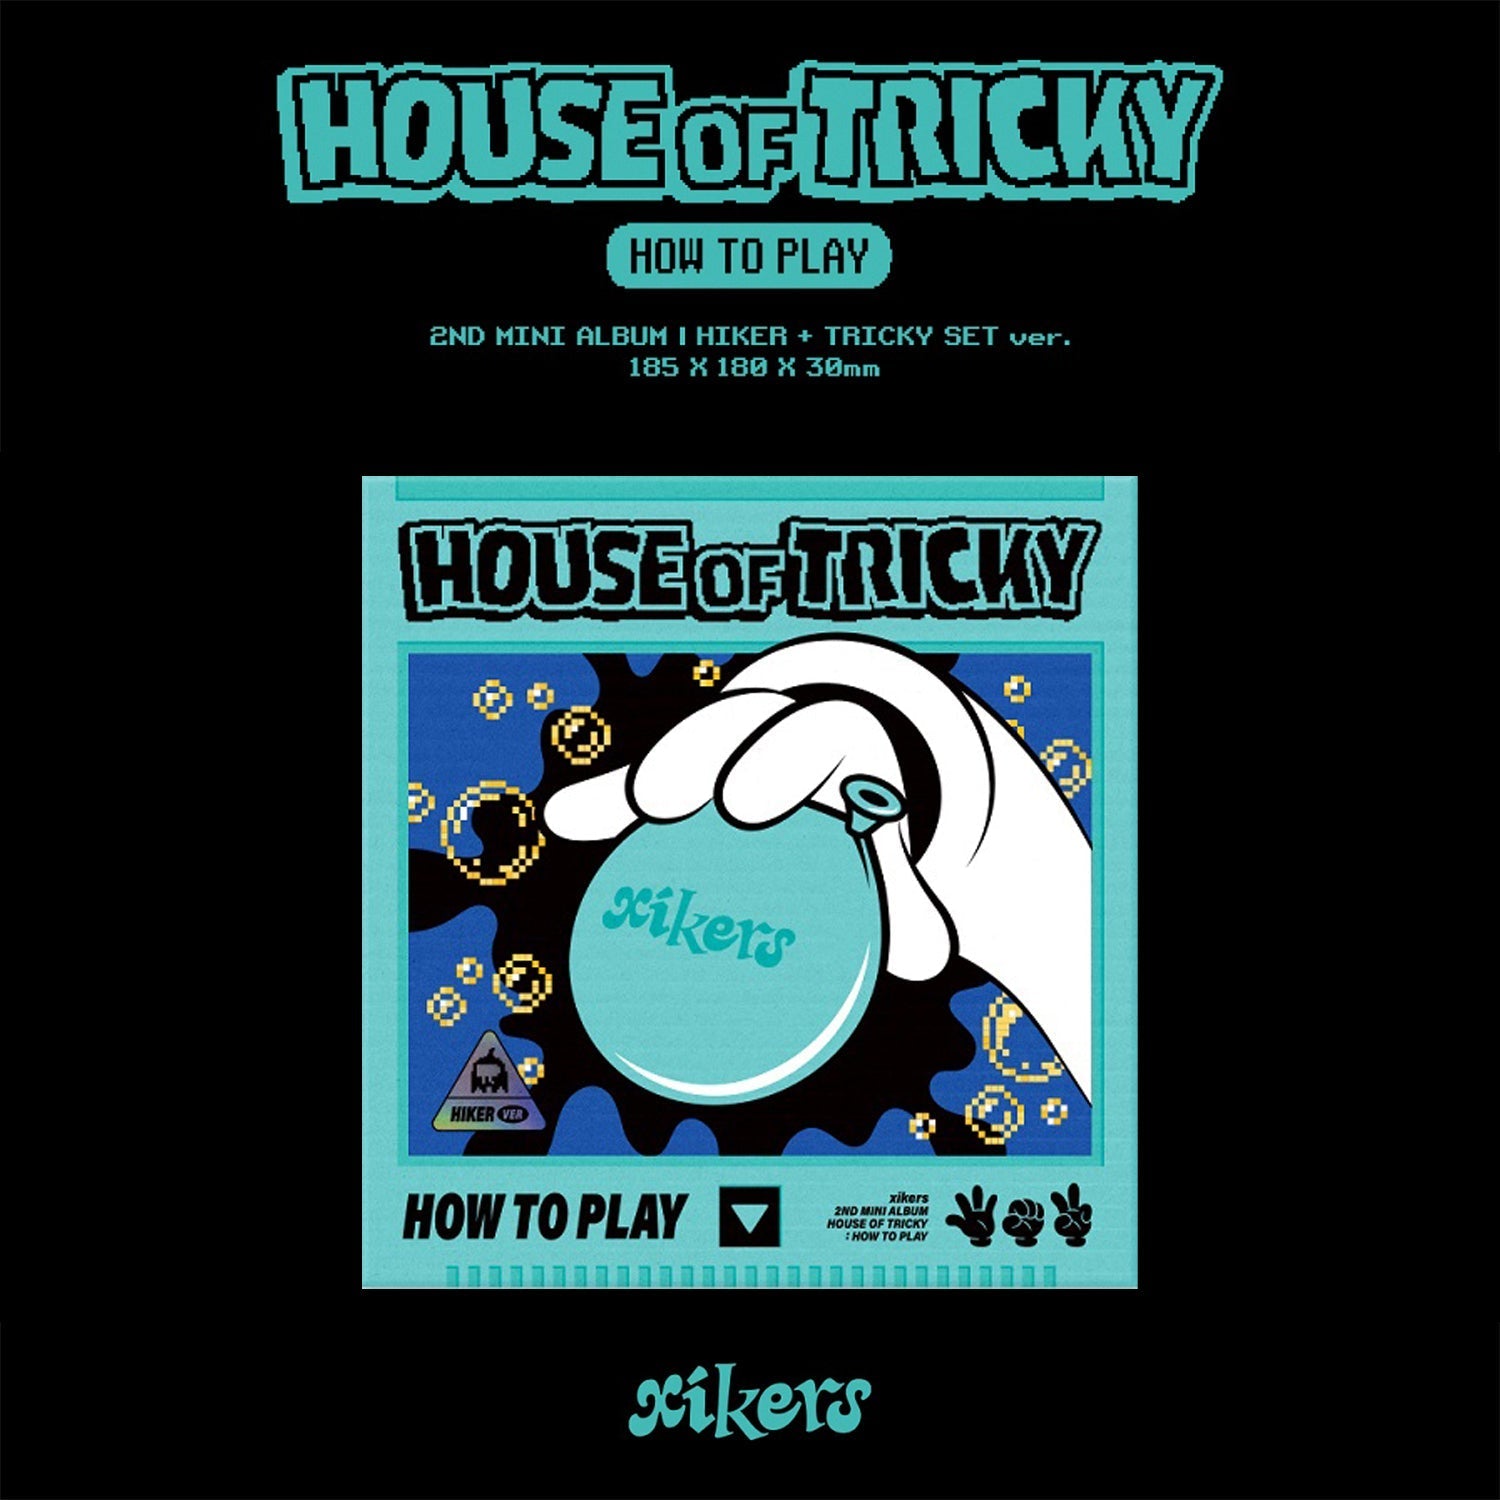 xikers - [HOUSE OF TRICKY : HOW TO PLAY] (2nd Mini Album HIKER Version)